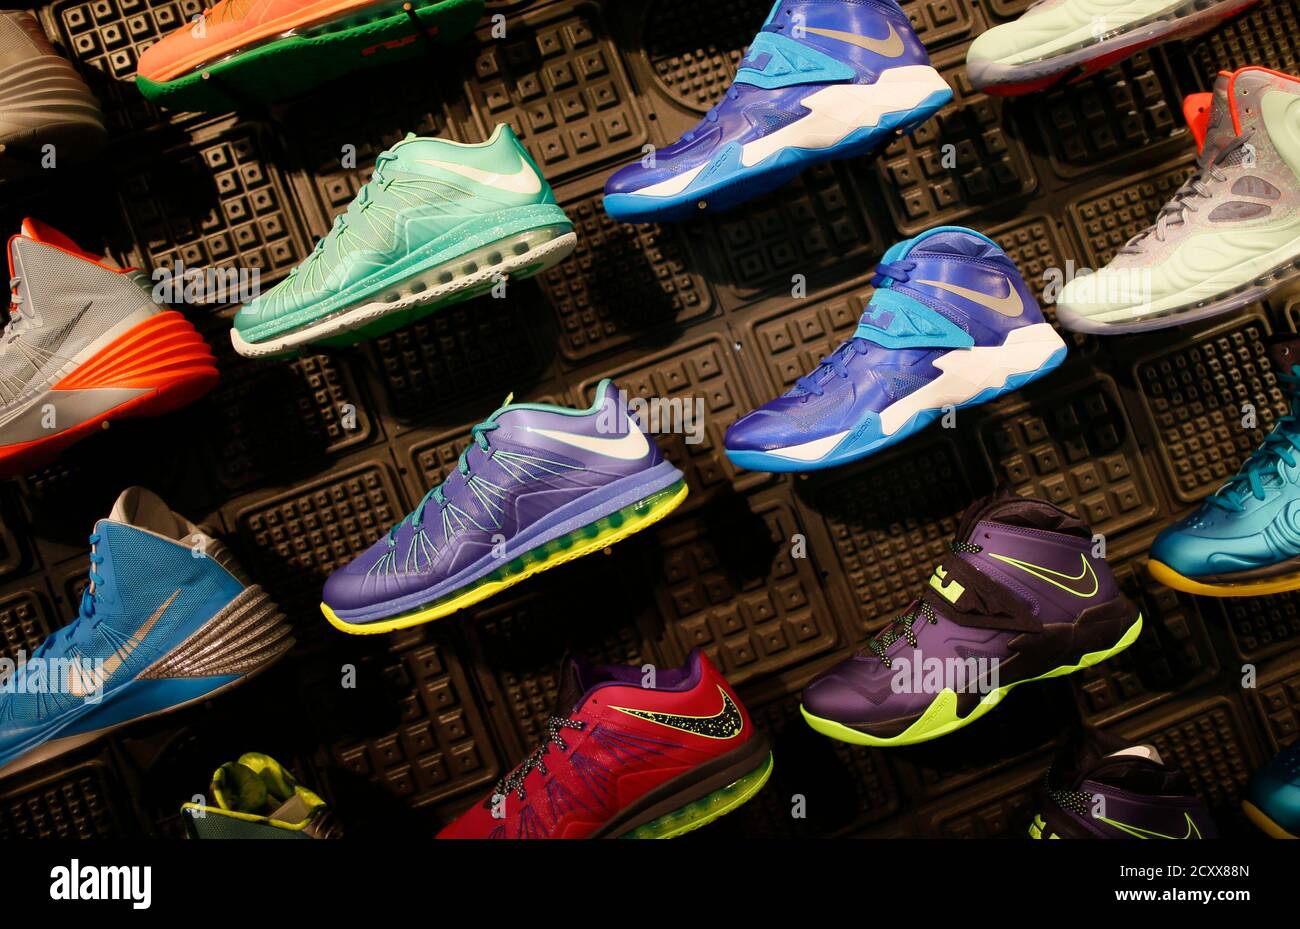 Shoes are displayed in the Nike store in Santa Monica, California,  September 25, 2013. NIKE, Inc. plans to release its first quarter fiscal  2014 financial results on Thursday, September 26, 2013. REUTERS/Lucy